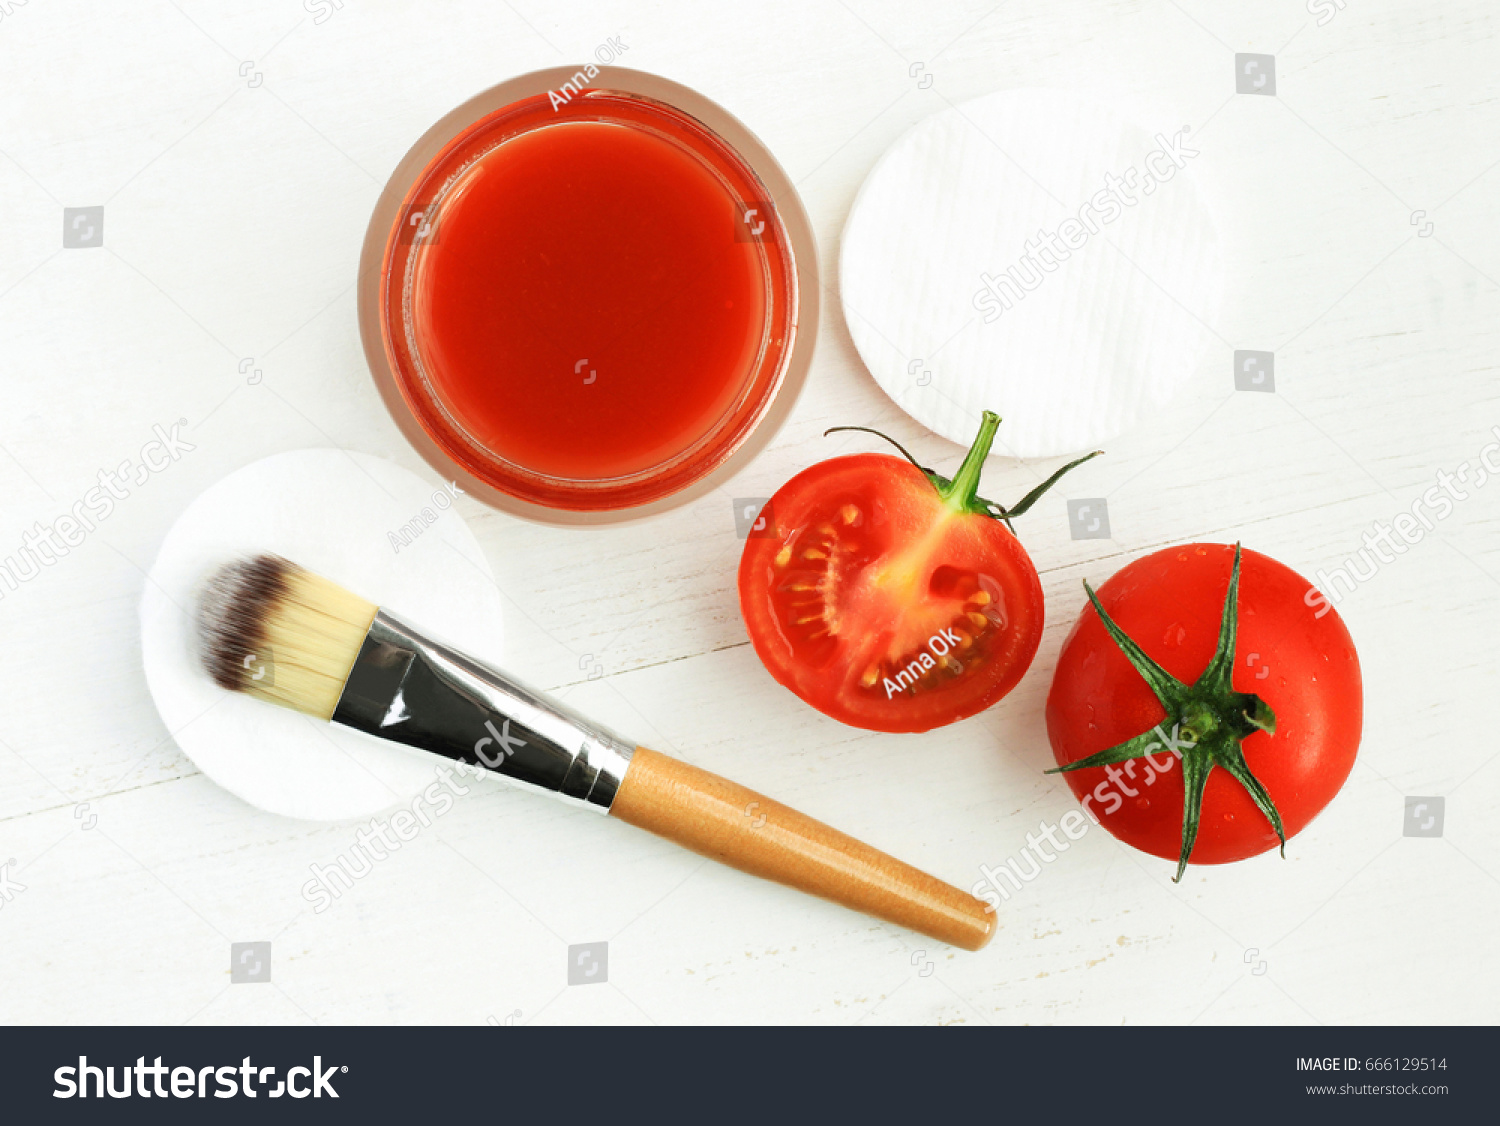 Tomato face mask for natural beauty care. Jar of juicy paste, red fresh fruit, applicator brush, top view white wooden background preparation homemade cosmetic   #666129514